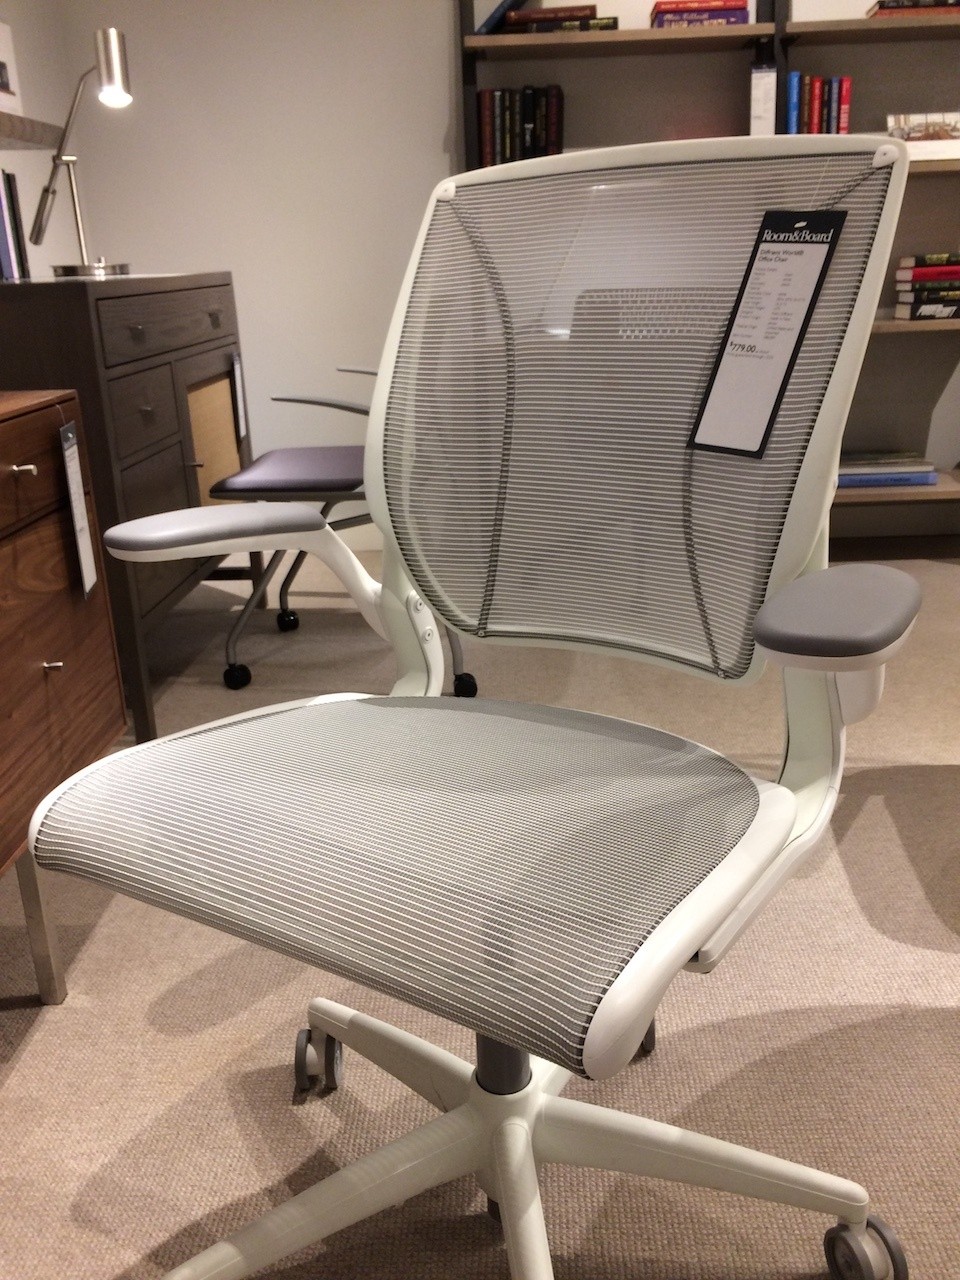 Humanscale Diffrient World Chair front angle view